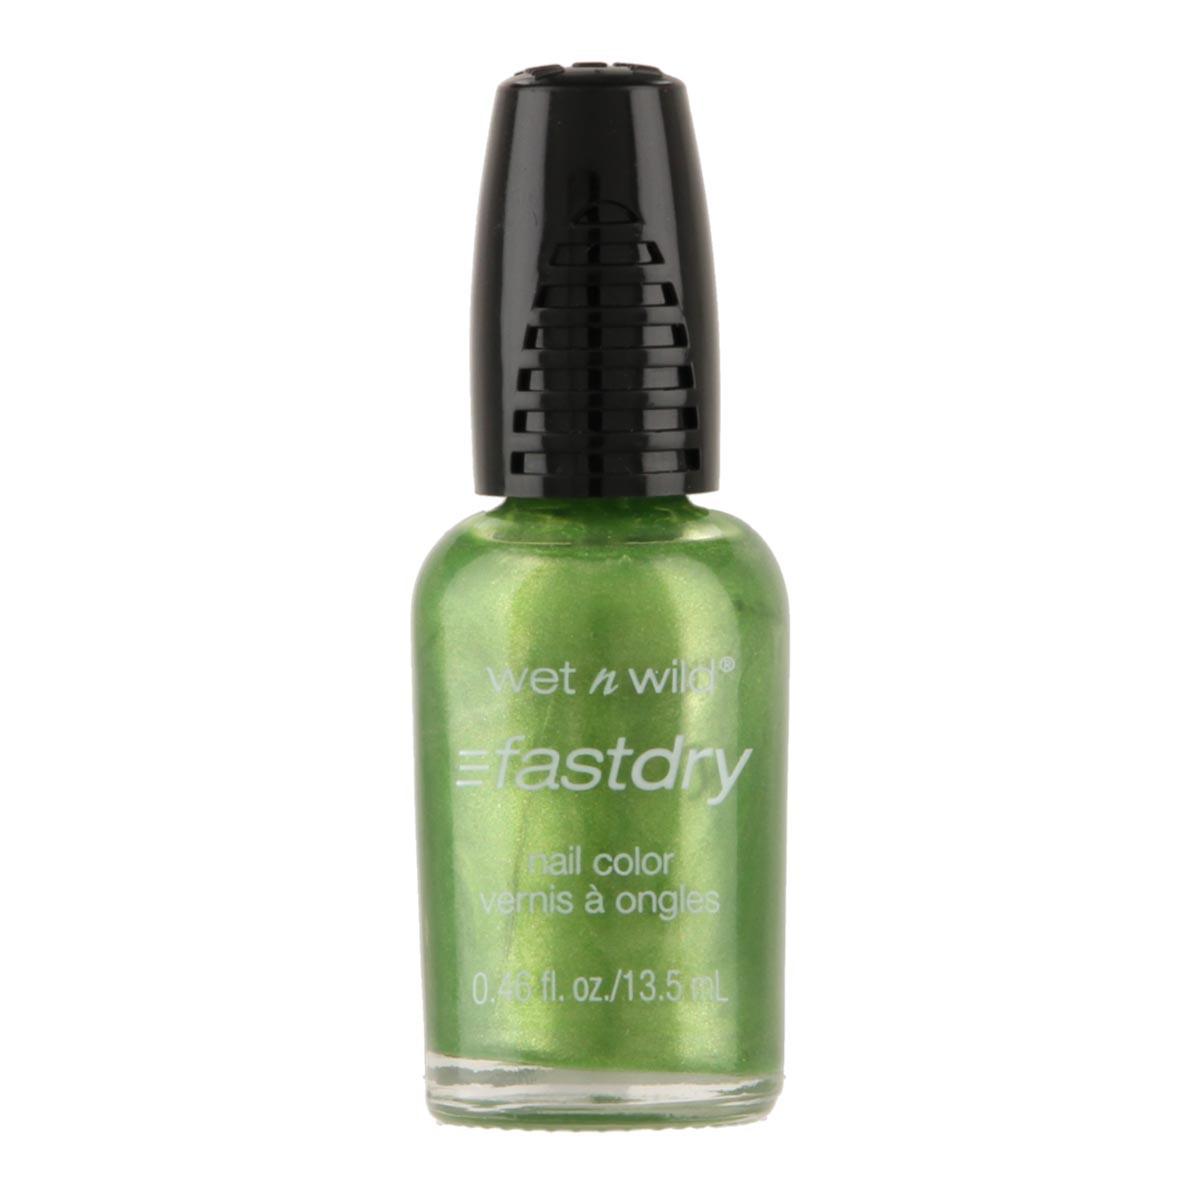 Wet n wild Fastdry Nail A Color Sage In The City Green | Dressinn